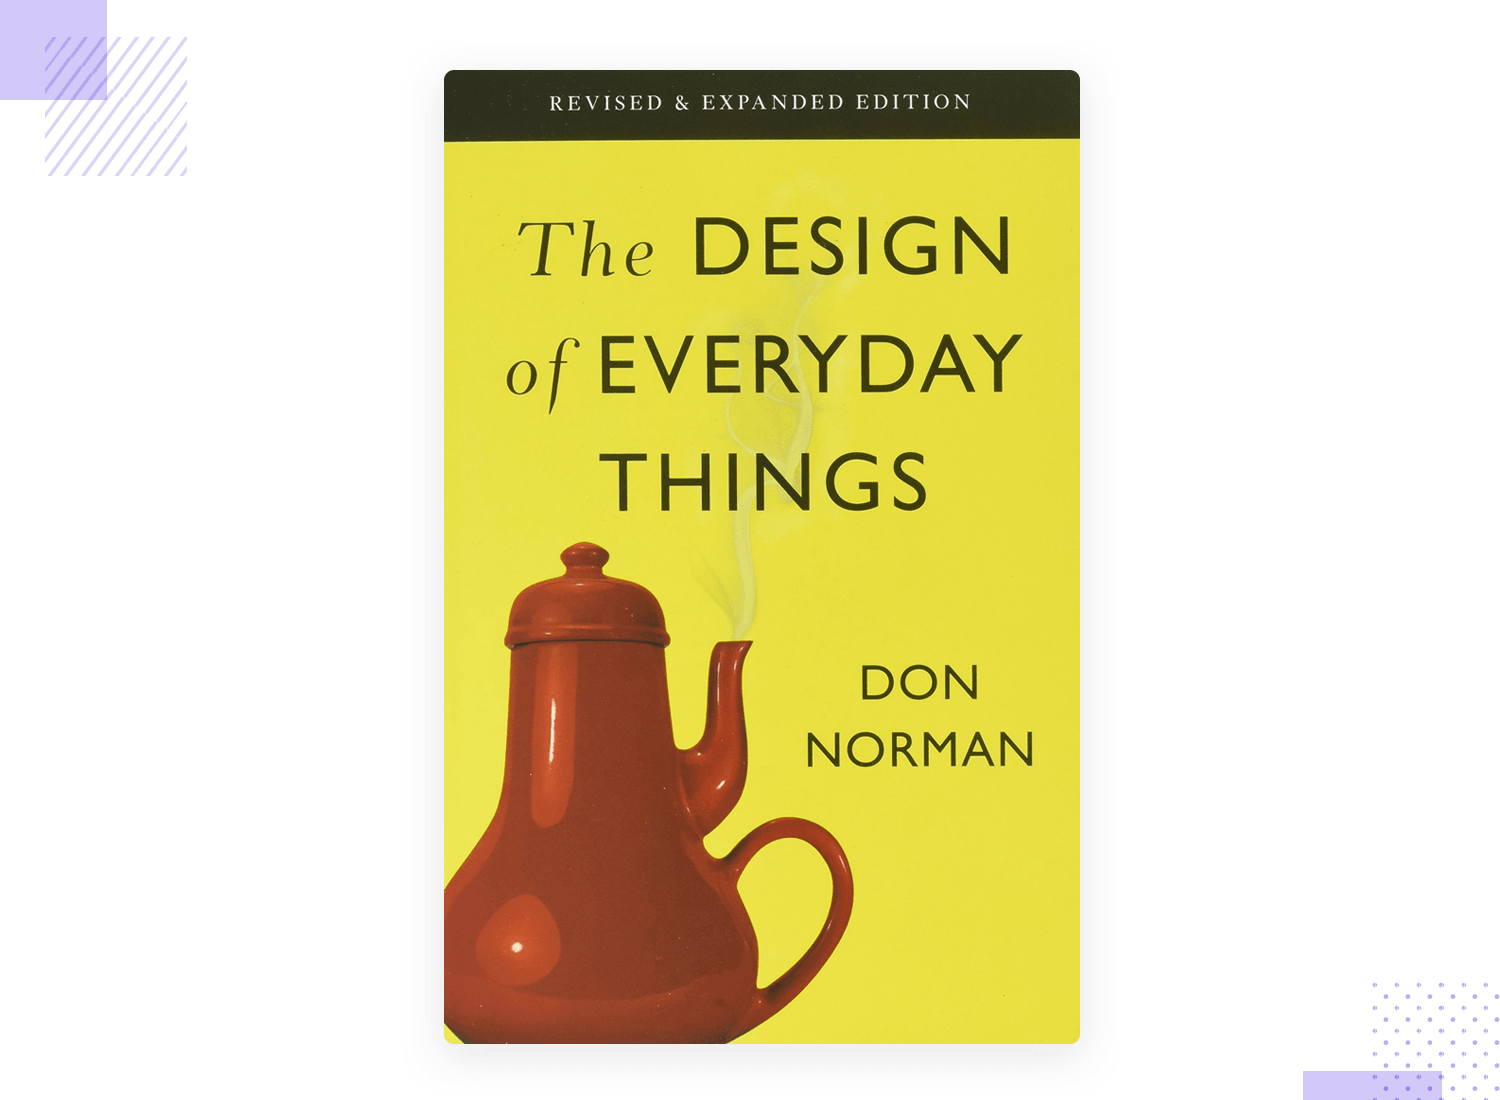 design of everyday things by don norman as ux book